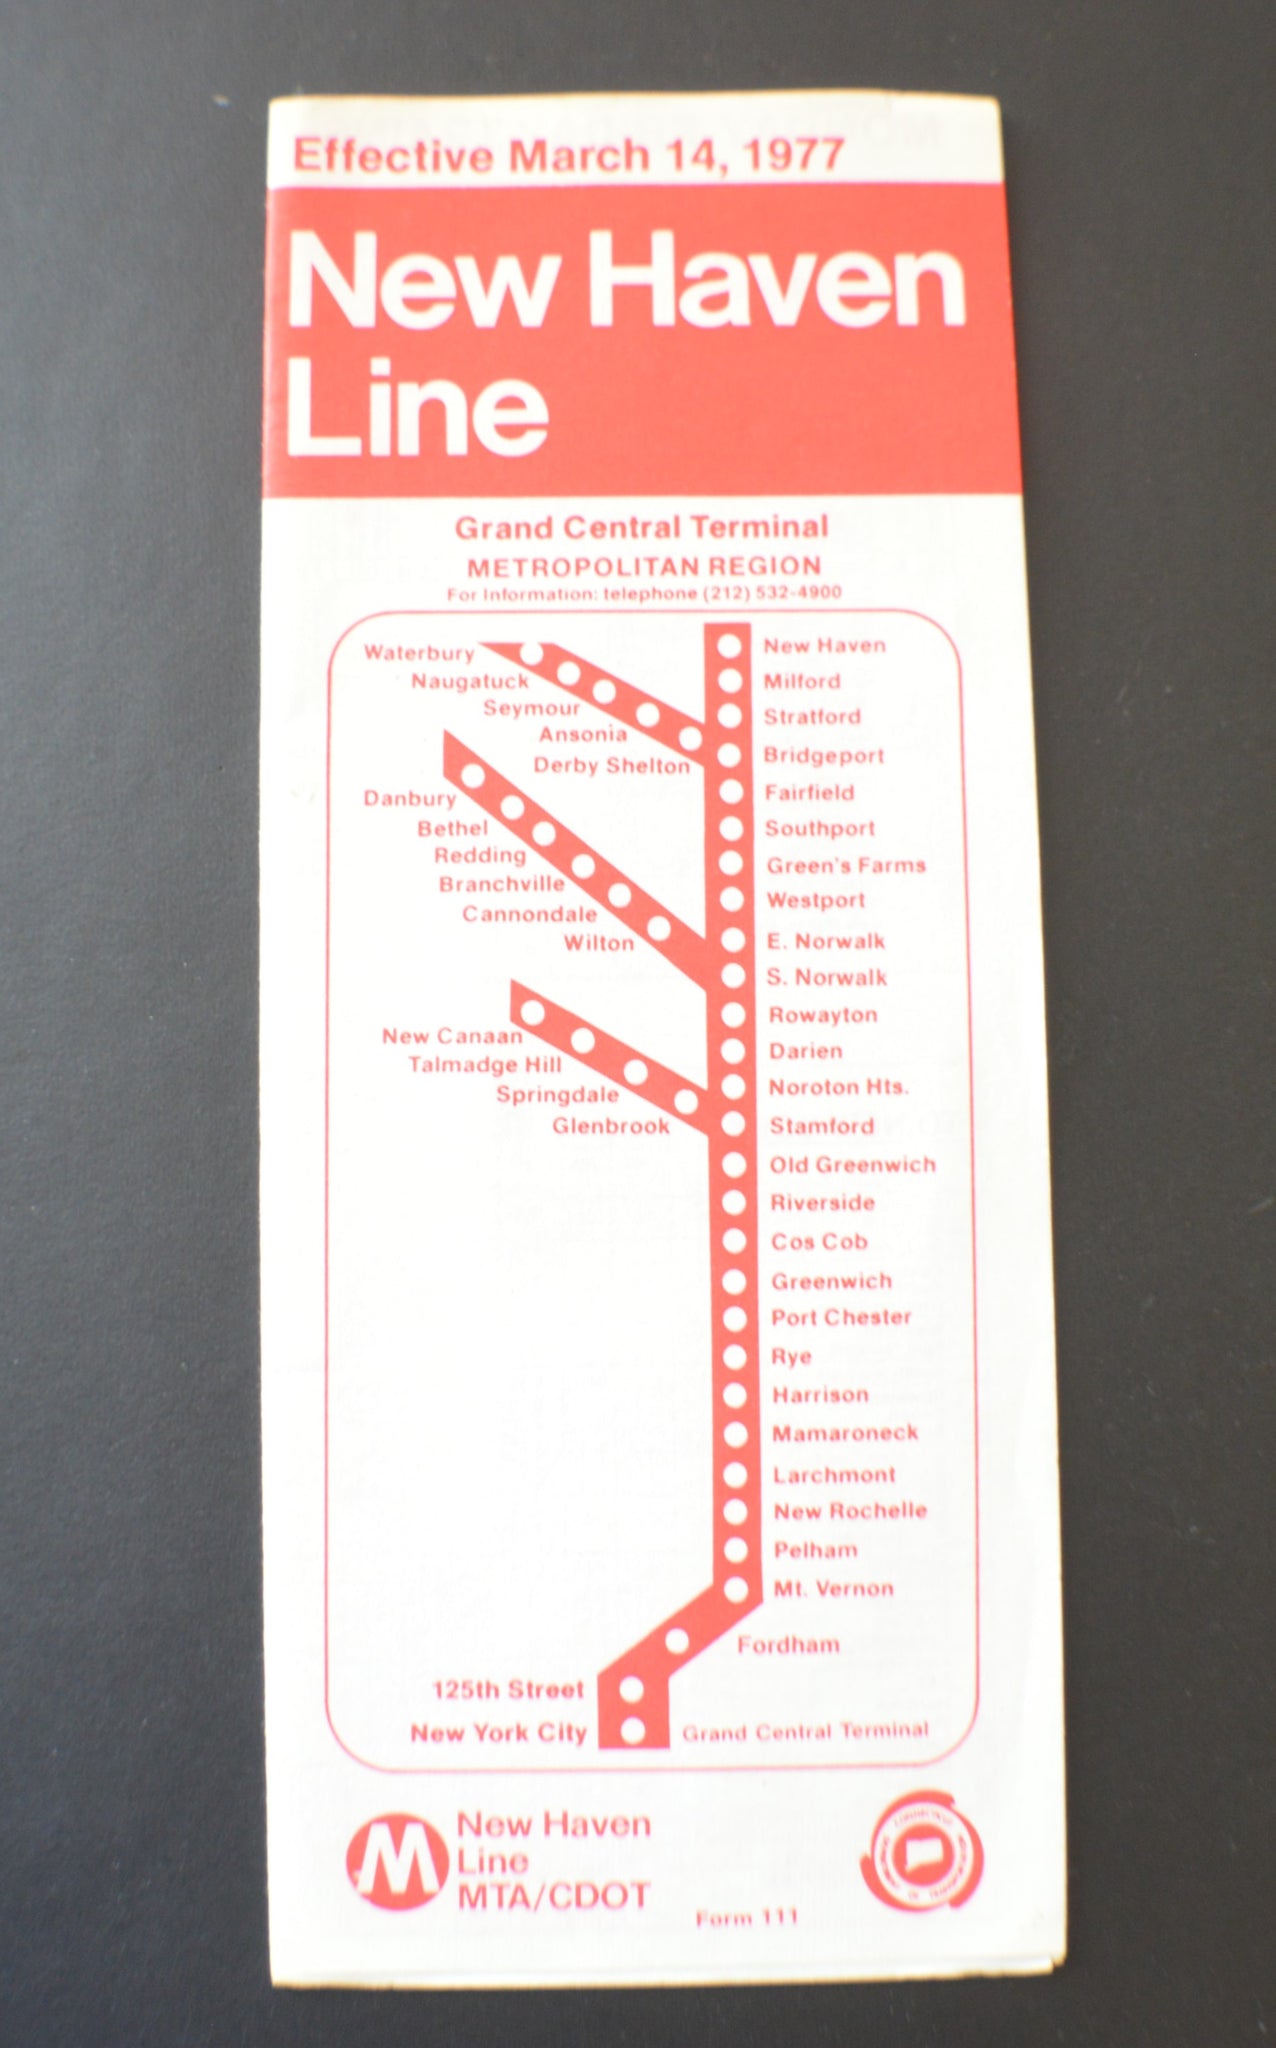 CT Department of Transportation "New Haven Line" Timetable (1977)